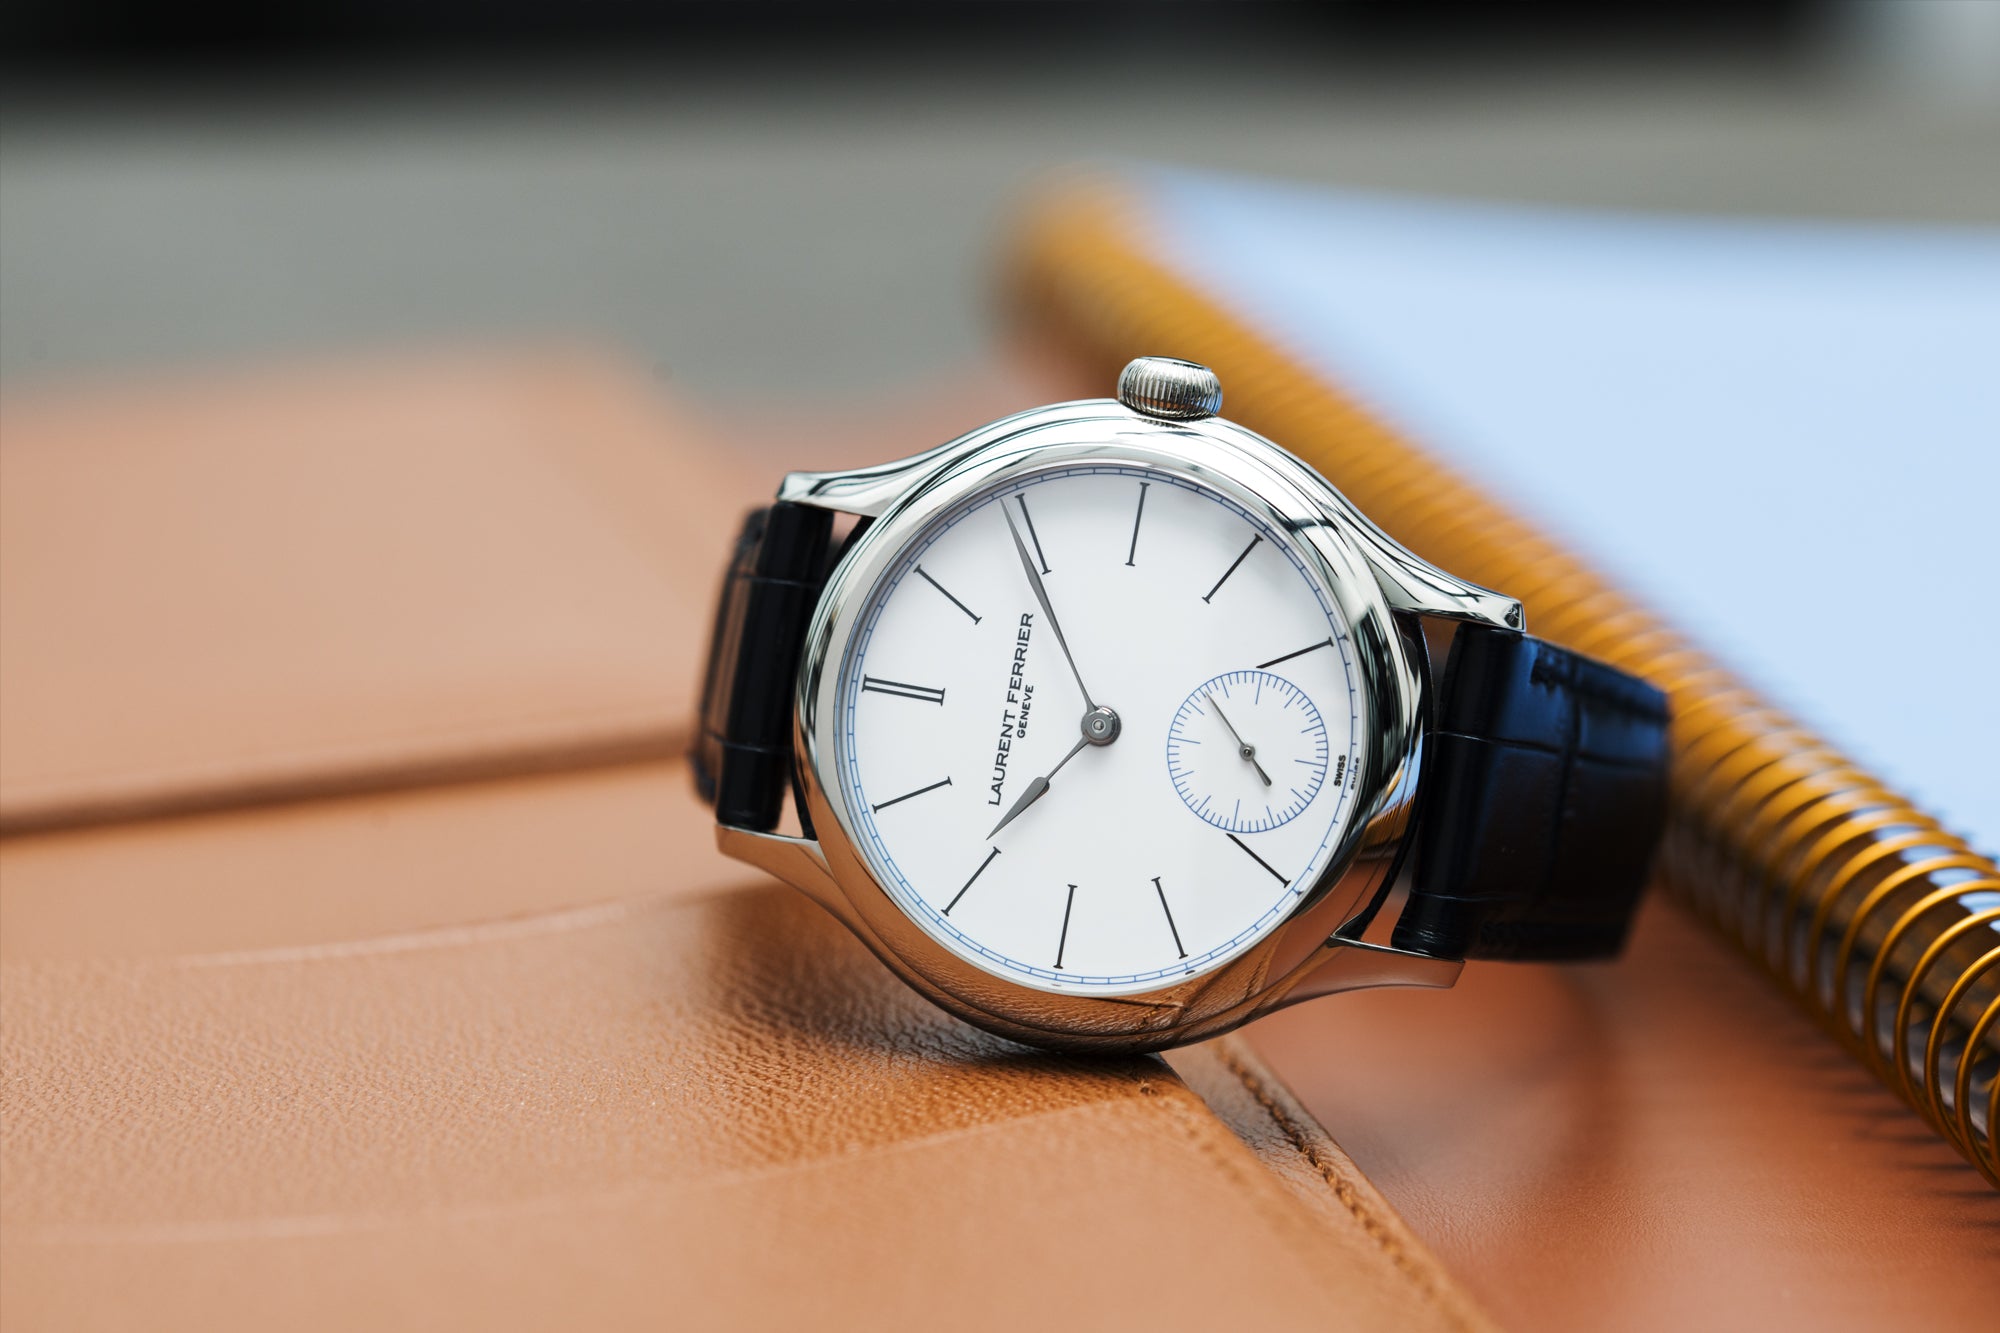 Laurent Ferrier Galet Micro-Rotor FBN 230.02 Enamel dial steel watch for sale online at A Collected Man London UK approved seller of independent watchmaker Laurent Ferrier